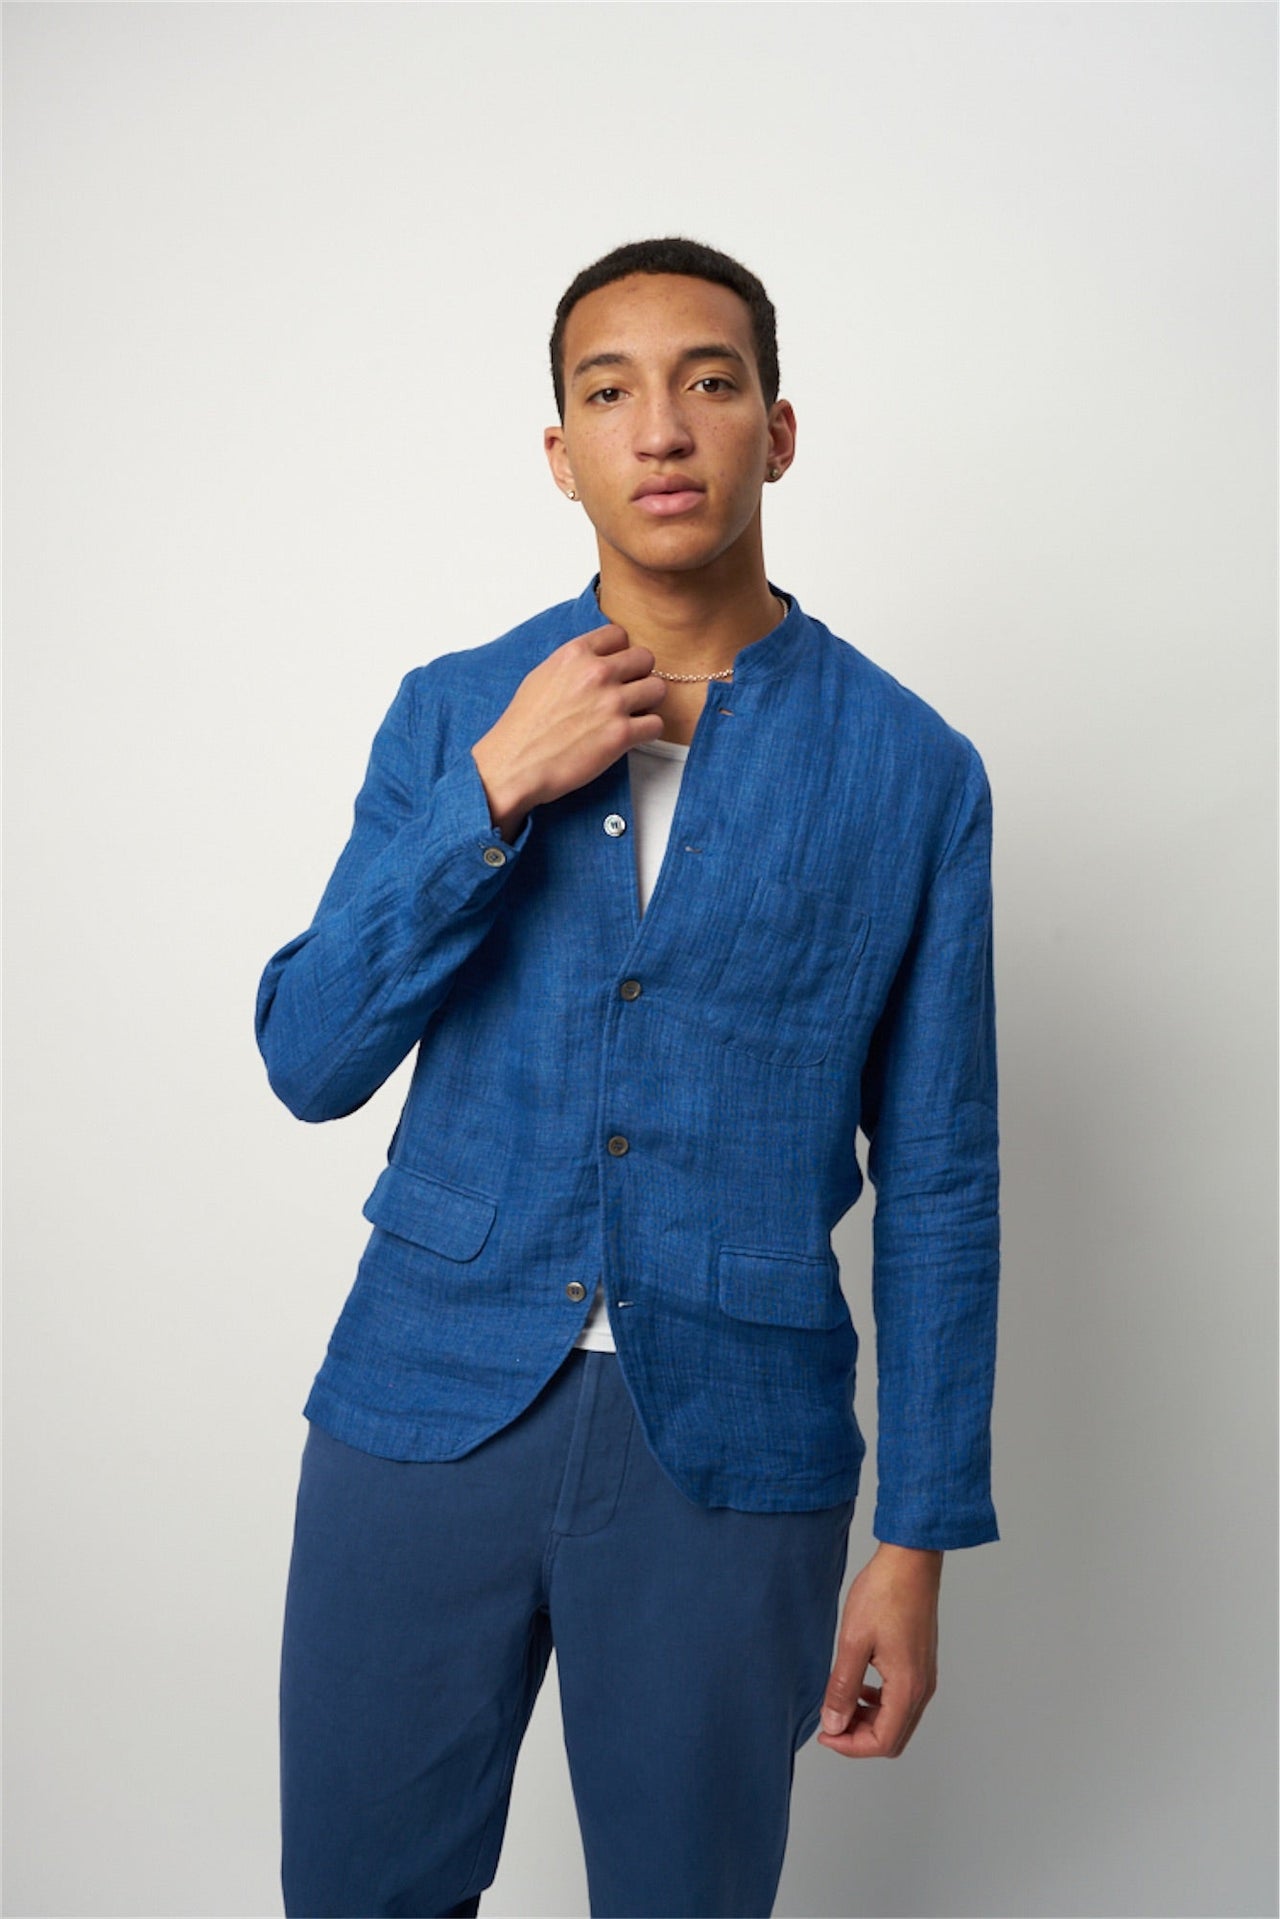 Strong Jacket in a Cobalt and Navy Blue Double Sided Fatigue Italian Linen and Cotton